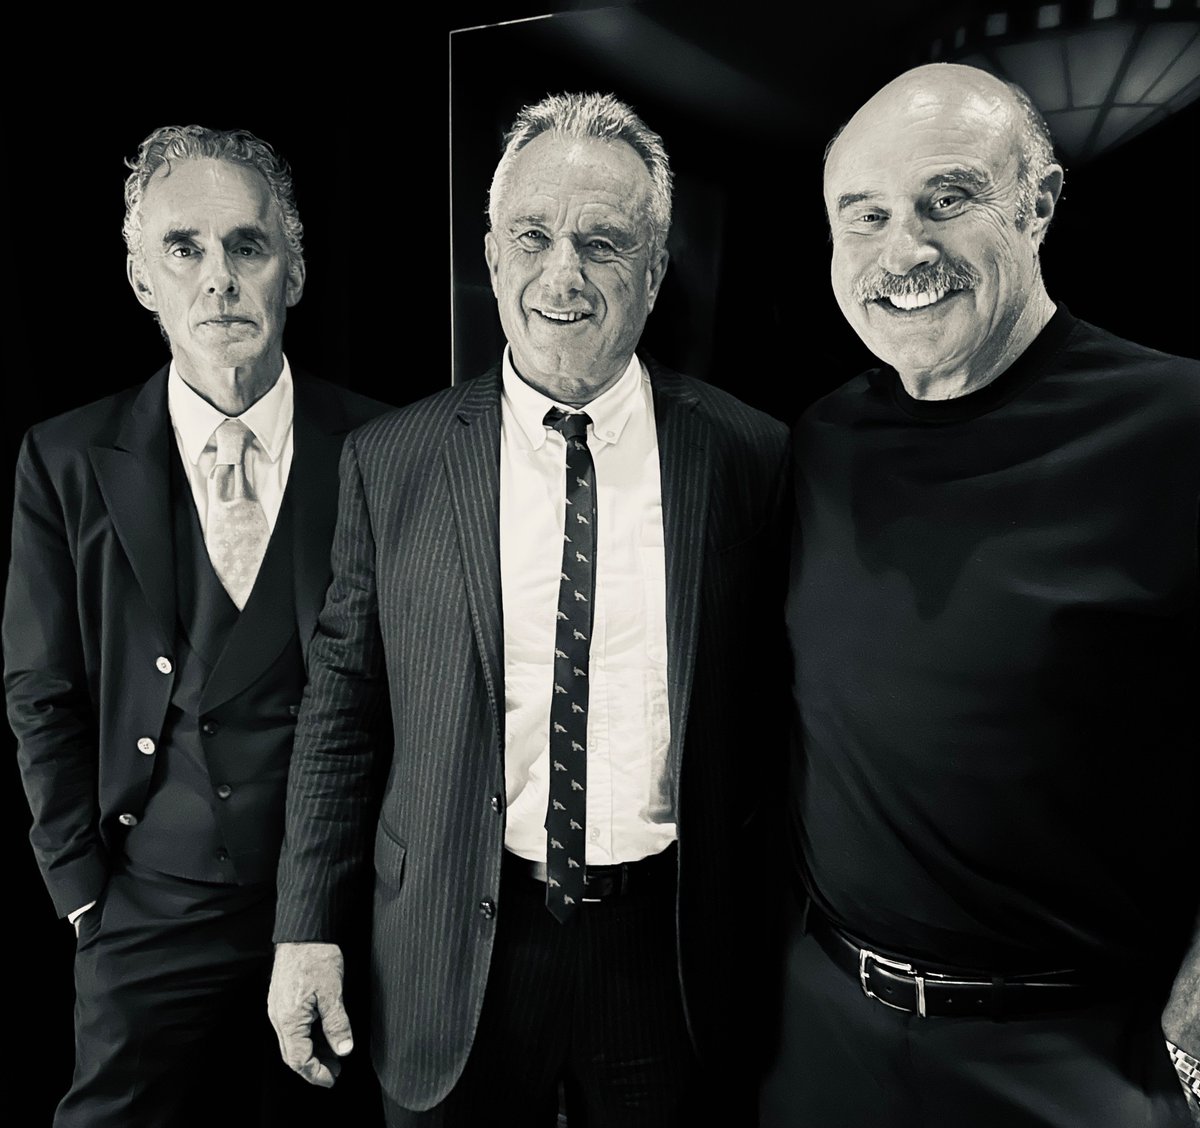 Good to see you last night in Dallas @DrPhil. Thank you for dropping by @RobertKennedyJr. We'll see if they'll cancel our next podcast! Looking forward to it.